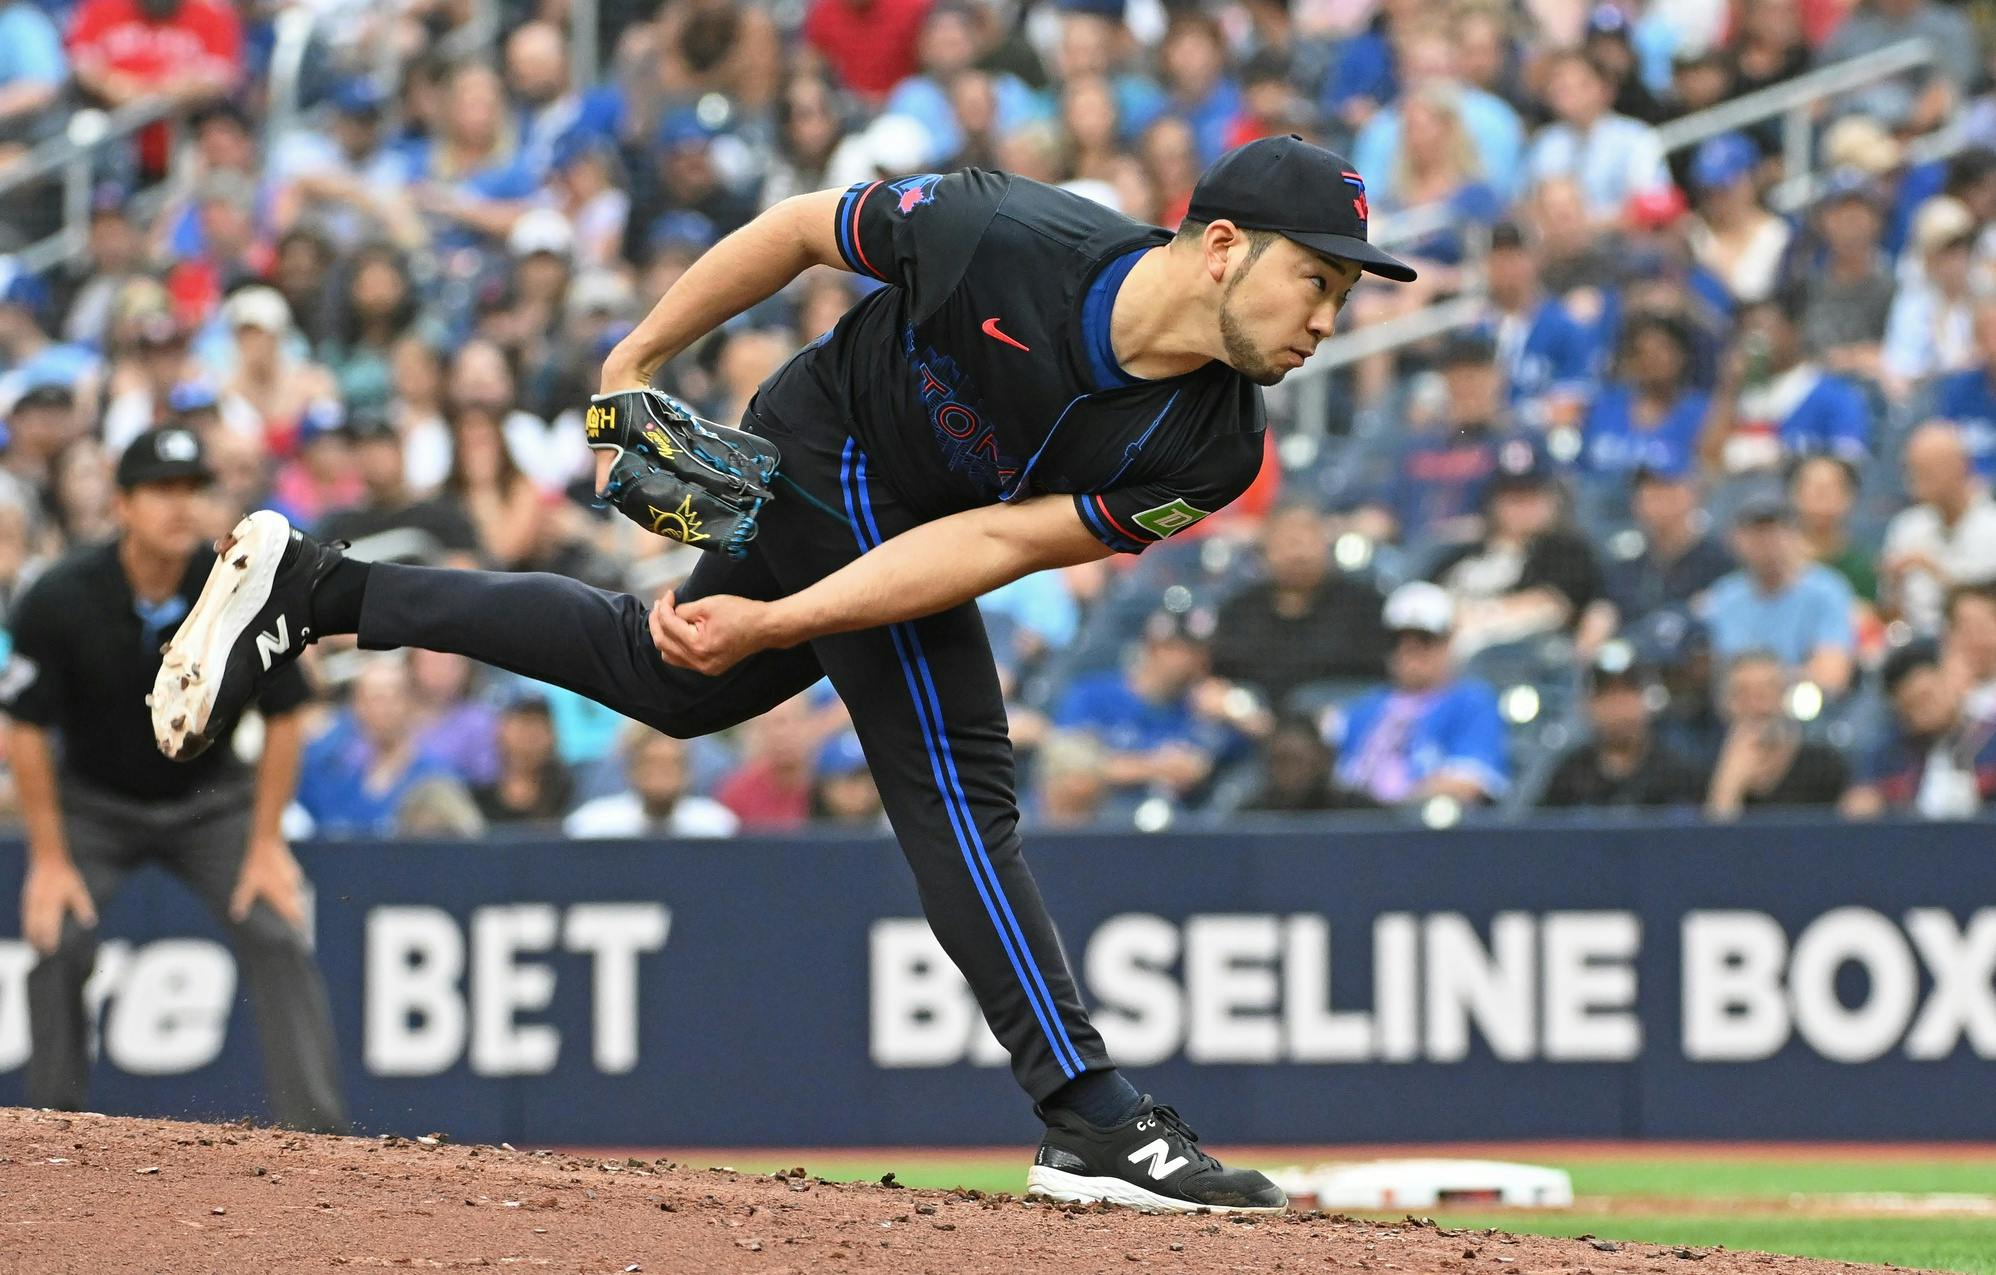 Toronto Blue Jays pitcher Yusei Kikuchi (16) pitches in the second inning against the Houston Astros at Rogers Centre.